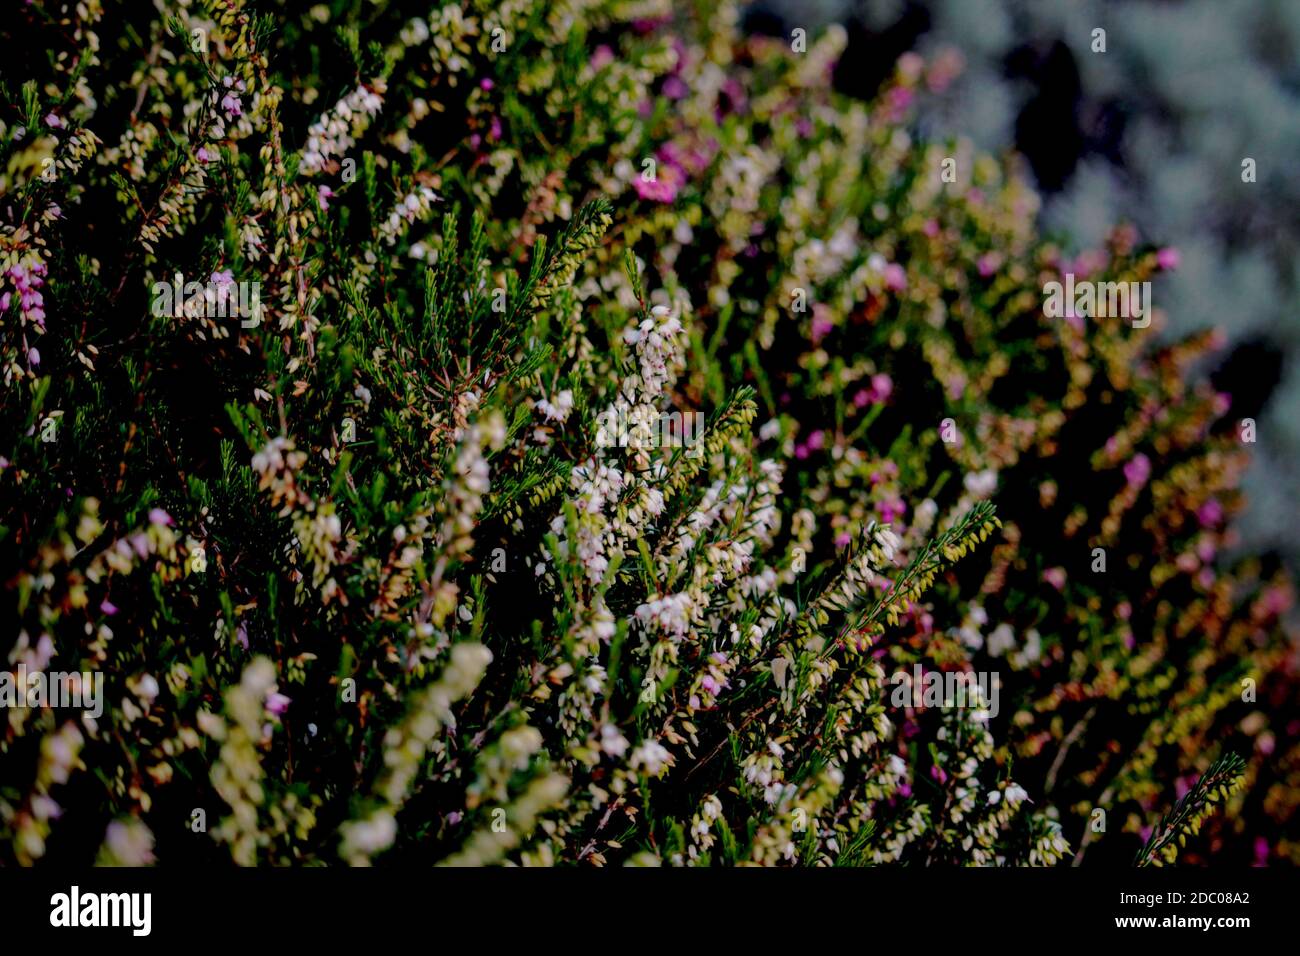 autumn leaves, stone texture, rosemary, white roses, heather, evergreen leaves, maple leaves. A series of autumn image from garden to express beauty. Stock Photo